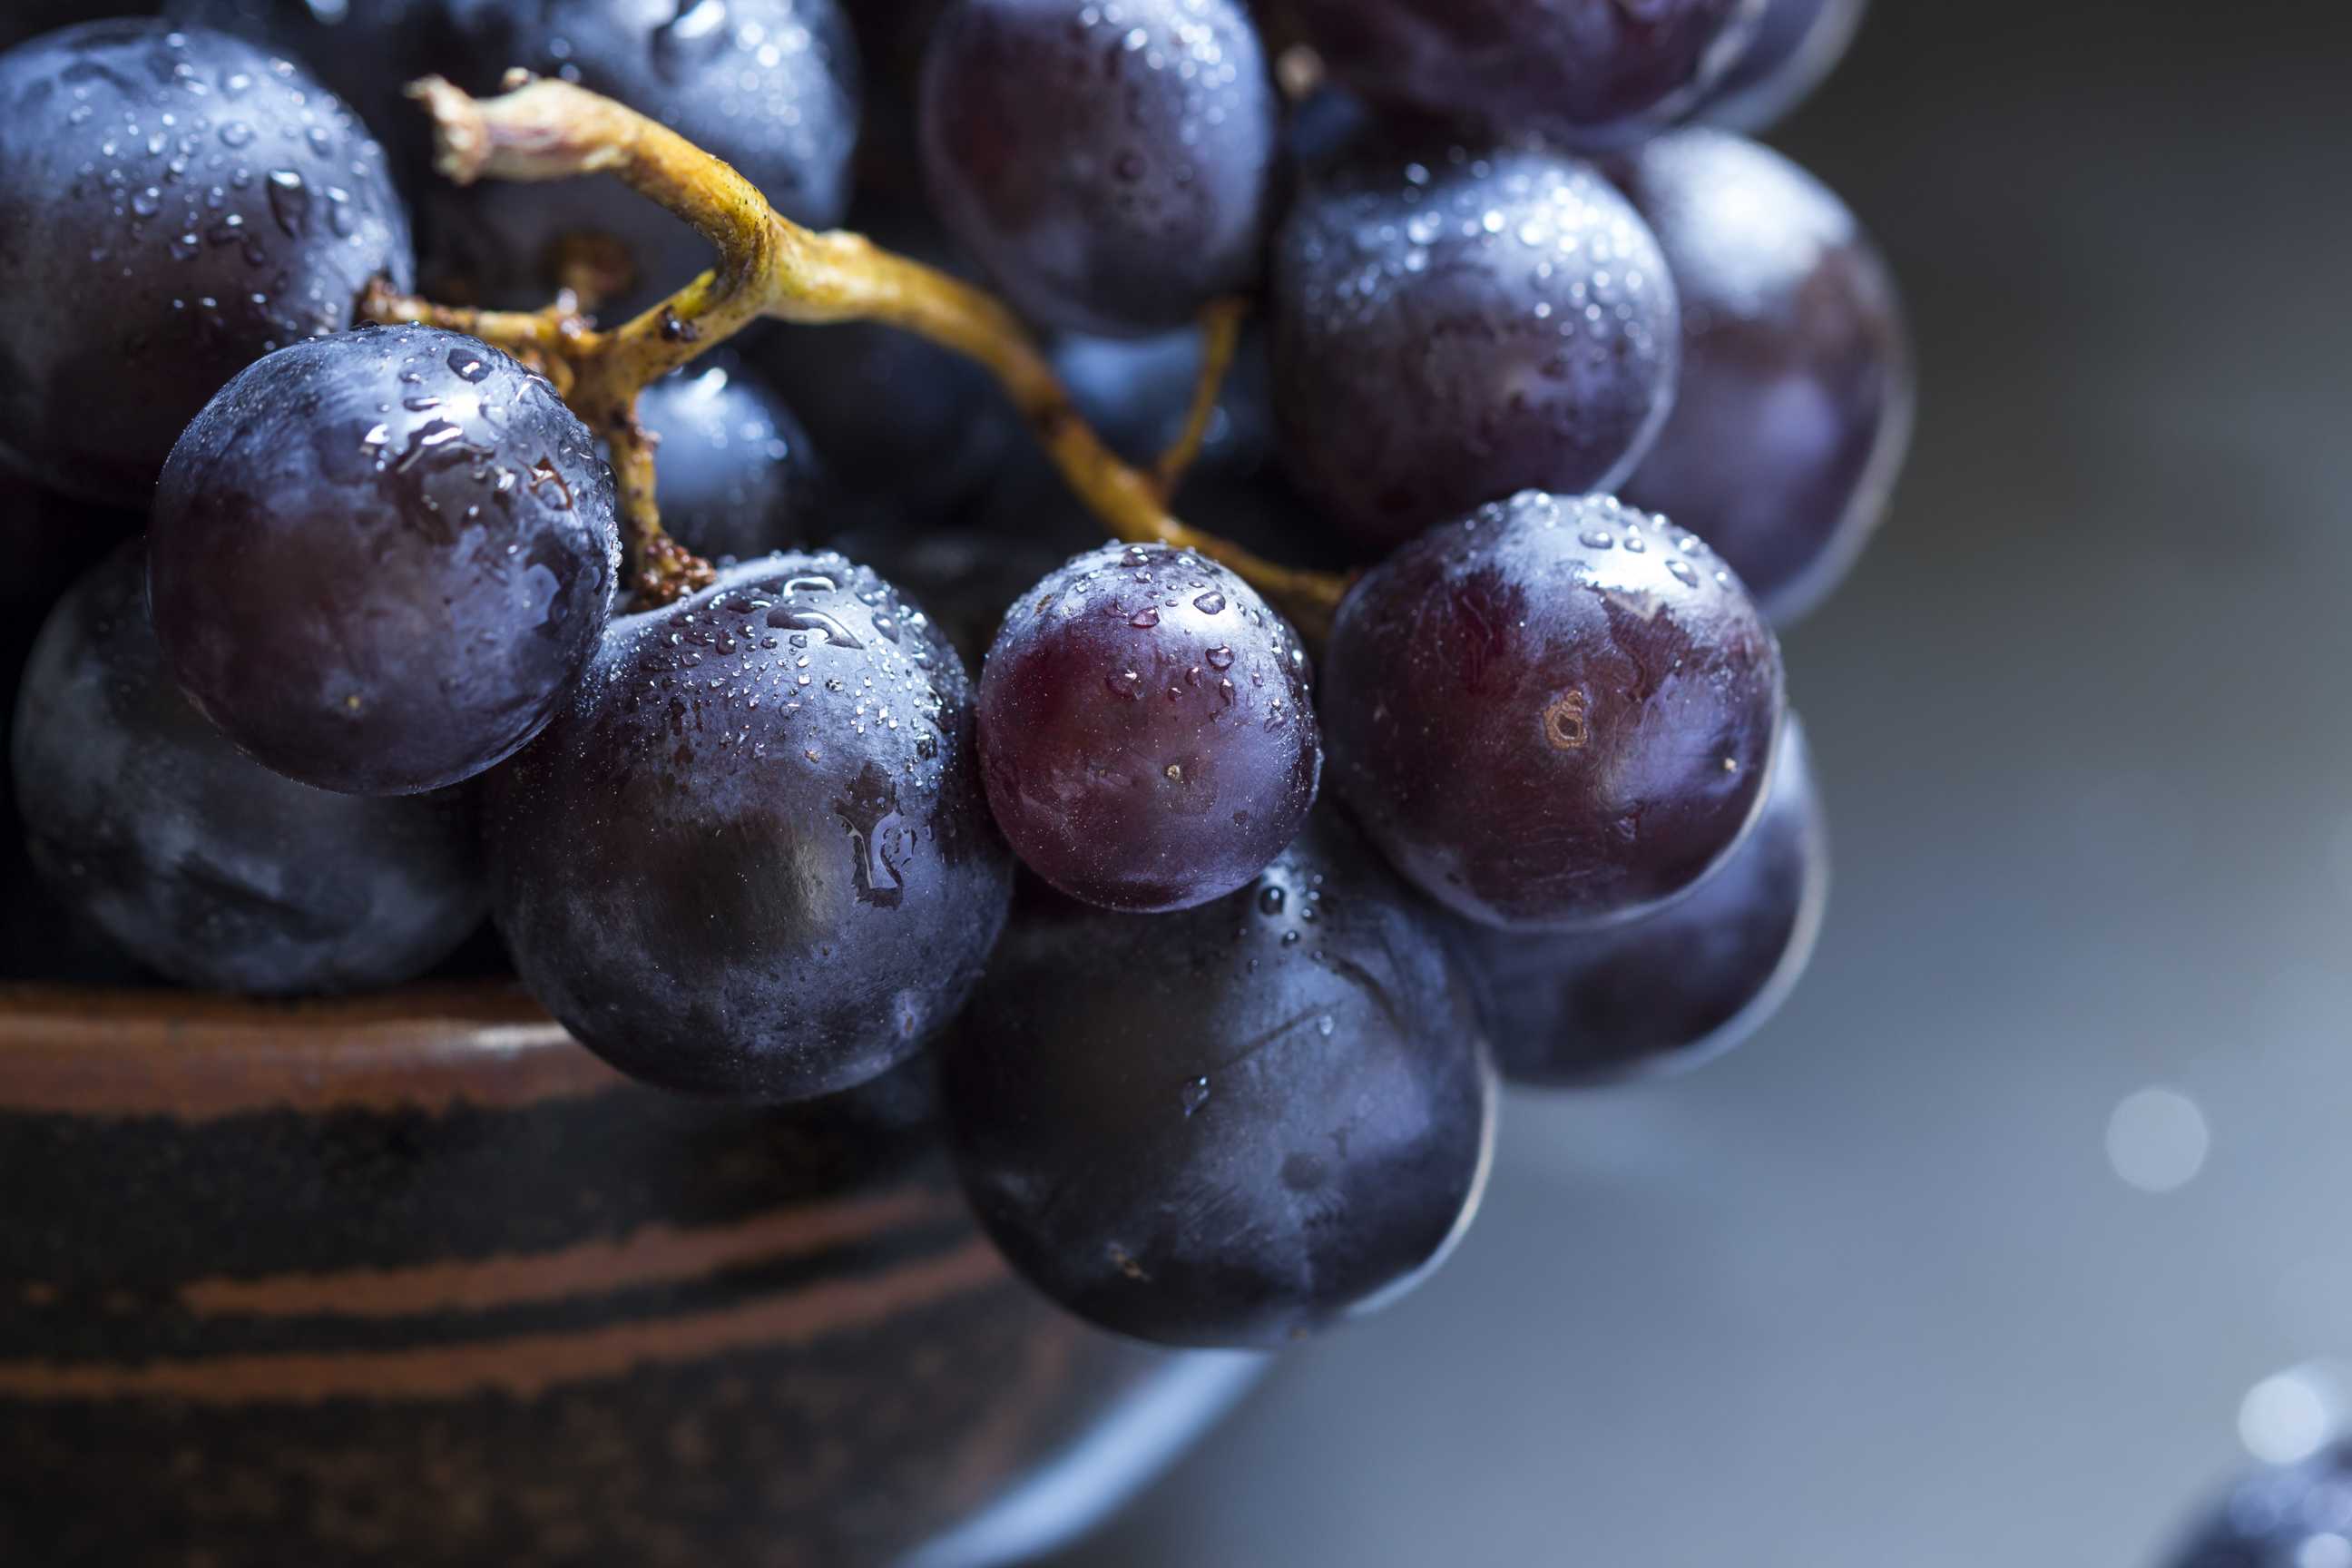 microsoft, ask a nutrition professional: are grapes and raisins good for diabetics?